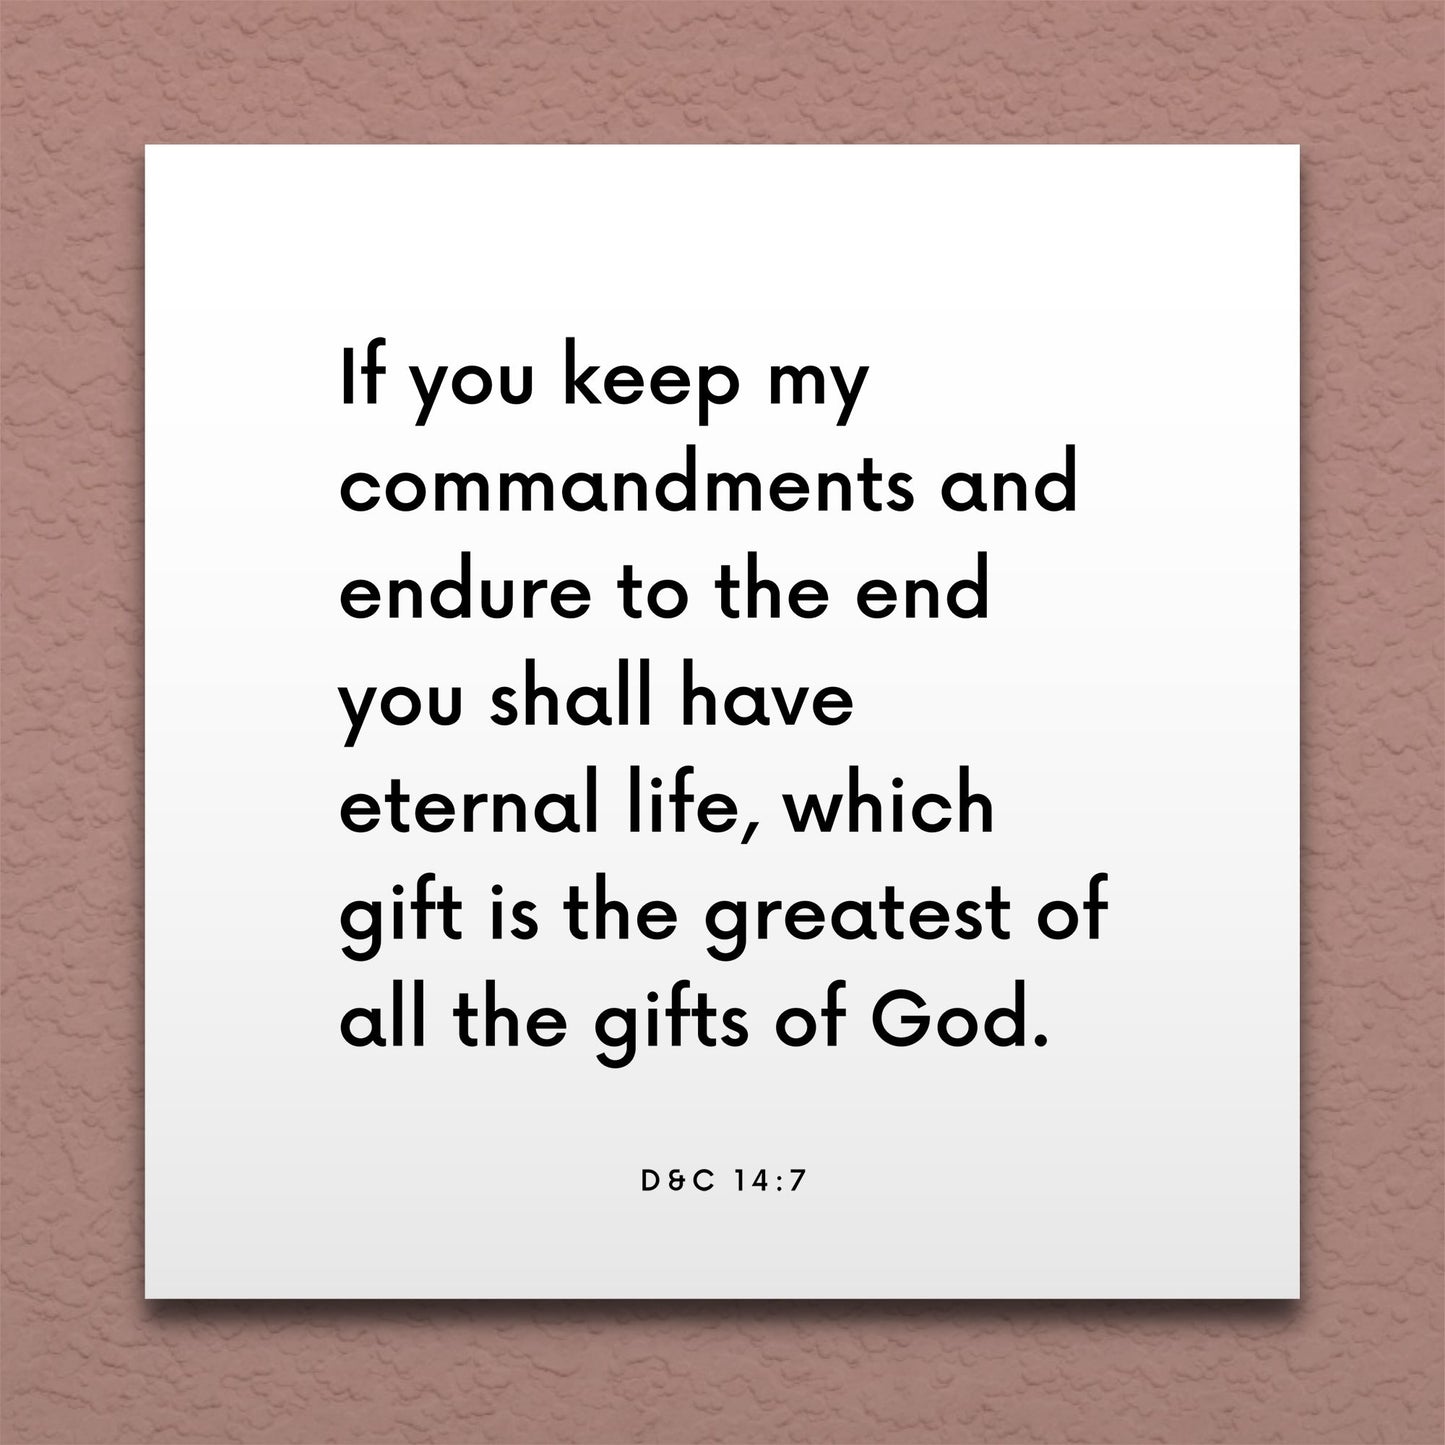 Wall-mounted scripture tile for D&C 14:7 - "If you keep my commandments and endure to the end"